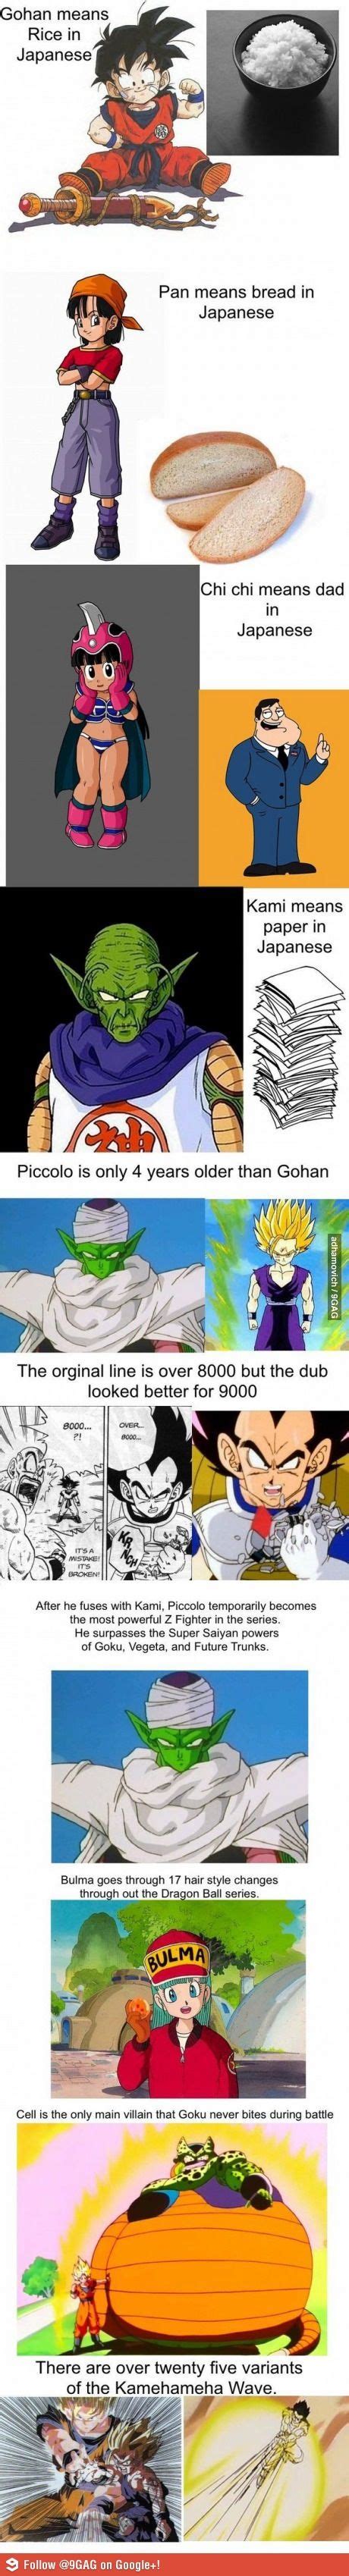 7 facts about dragon ball z. Dragon ball z facts | Fun and Quotes | Pinterest